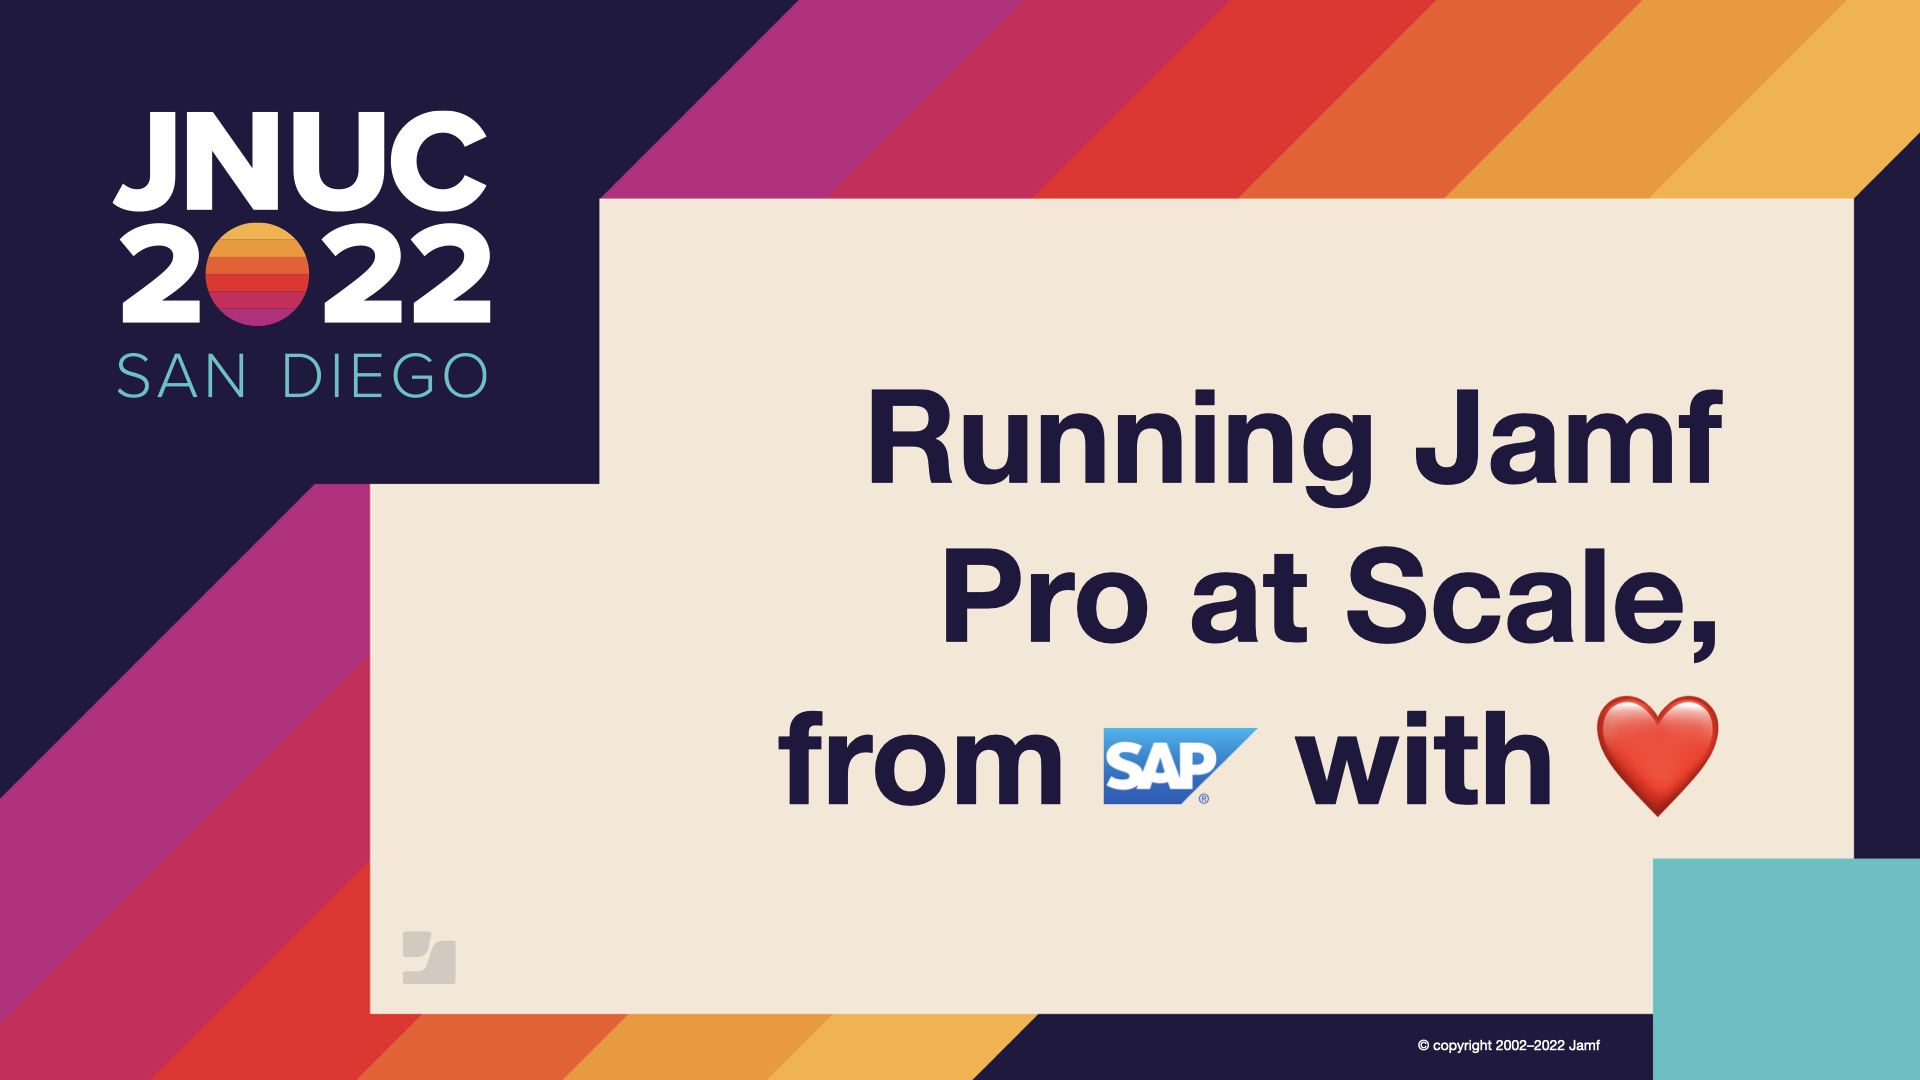 JNUC 2022 session: Running Jamf Pro at Scale, from SAP with [heart emoji]